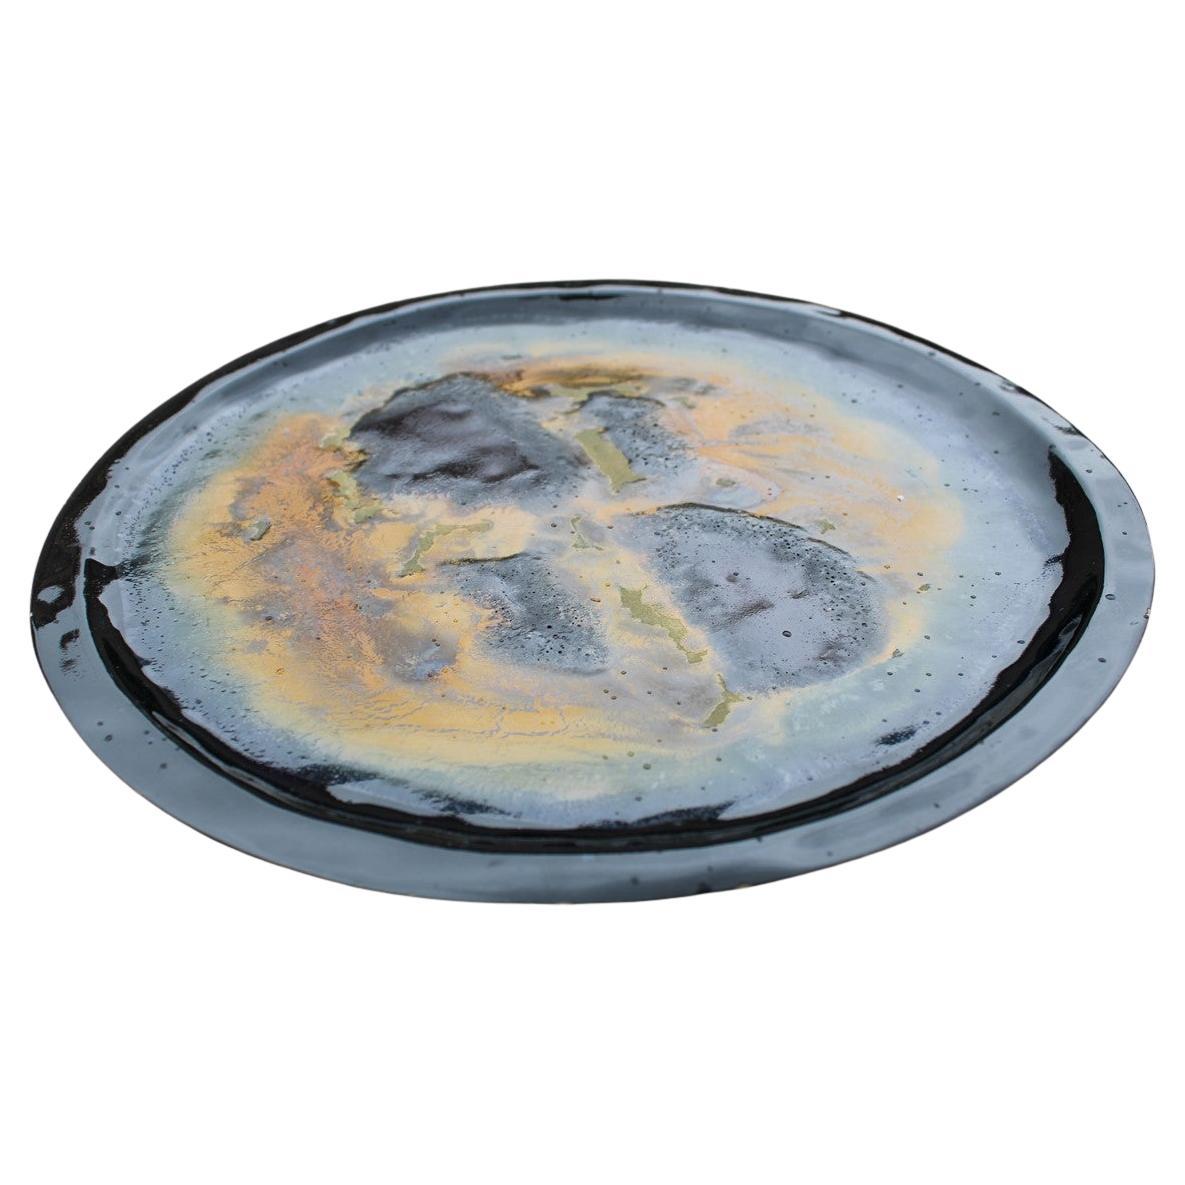 Abstract ceramic plate with Italian textured glaze